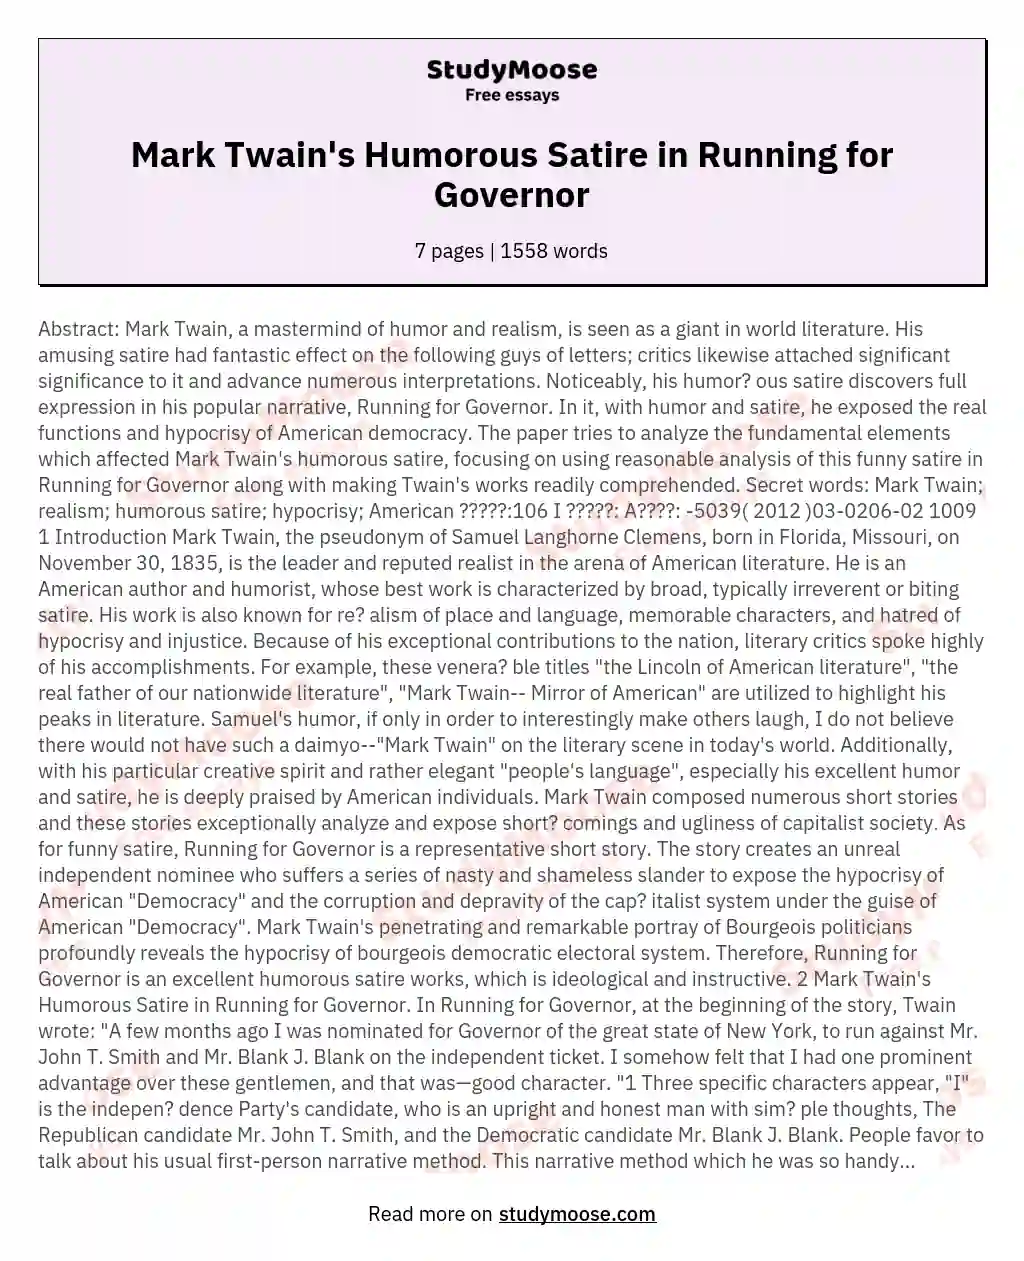 Mark Twain's Humorous Satire in Running for Governor